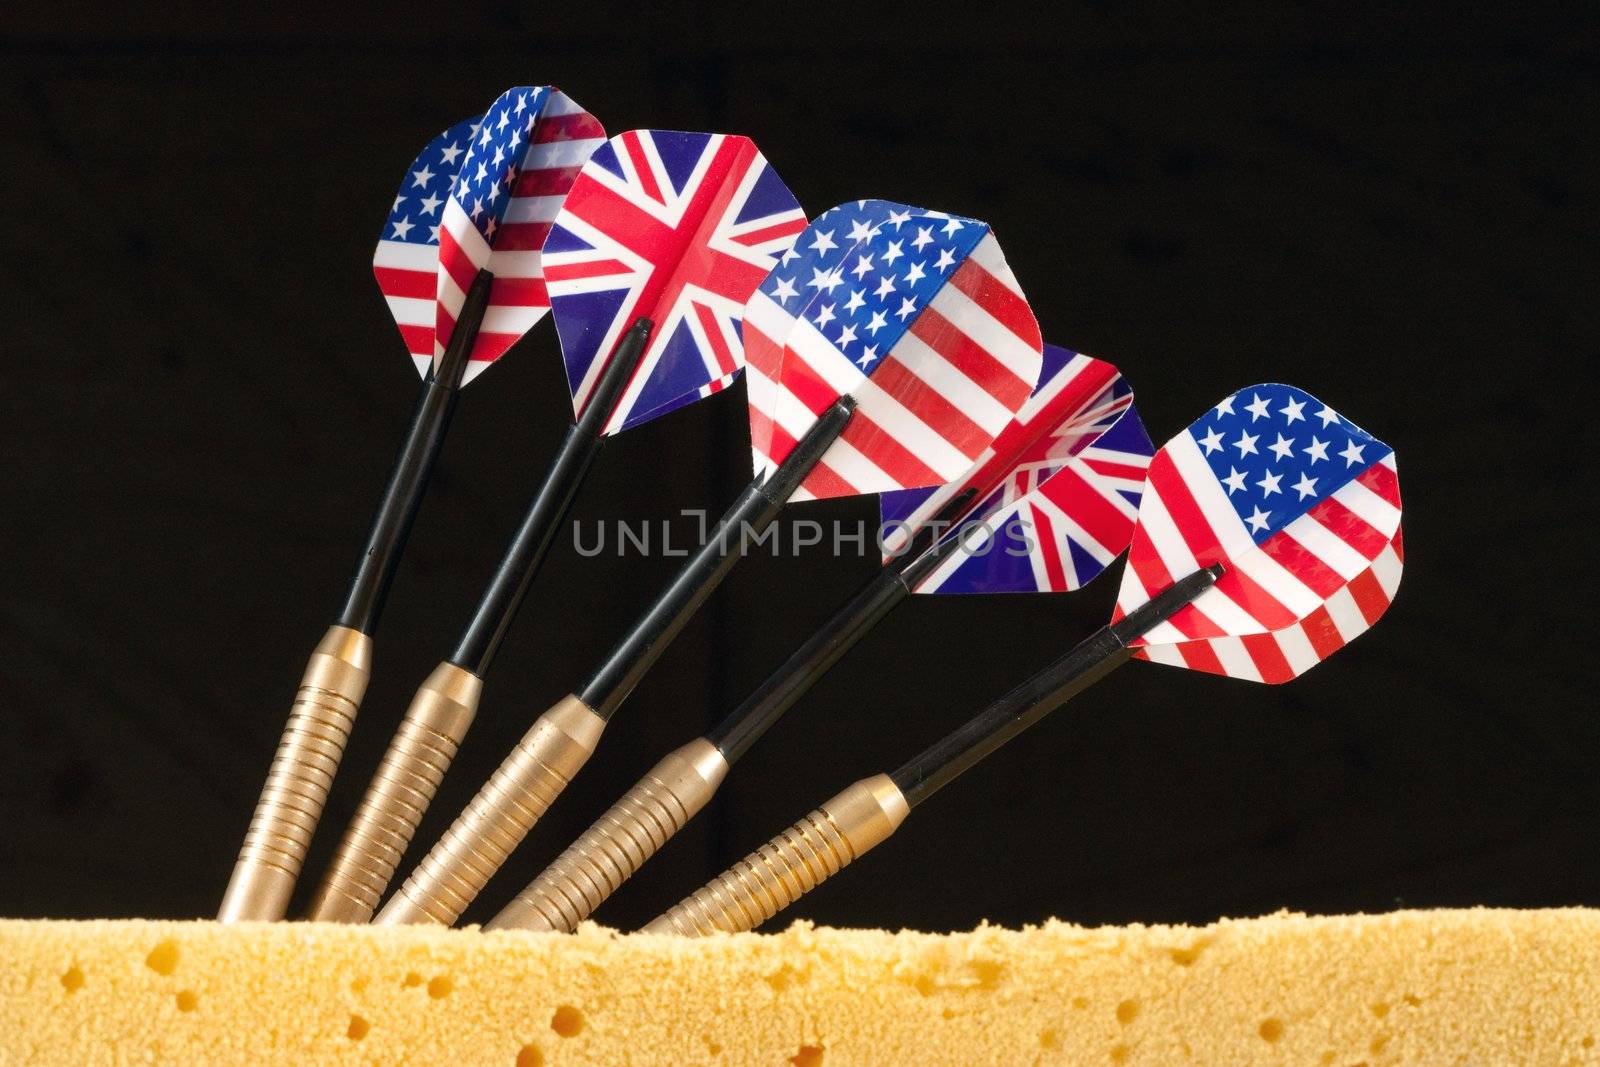 A bunch of darts with flags of the USA and the United Kingdom